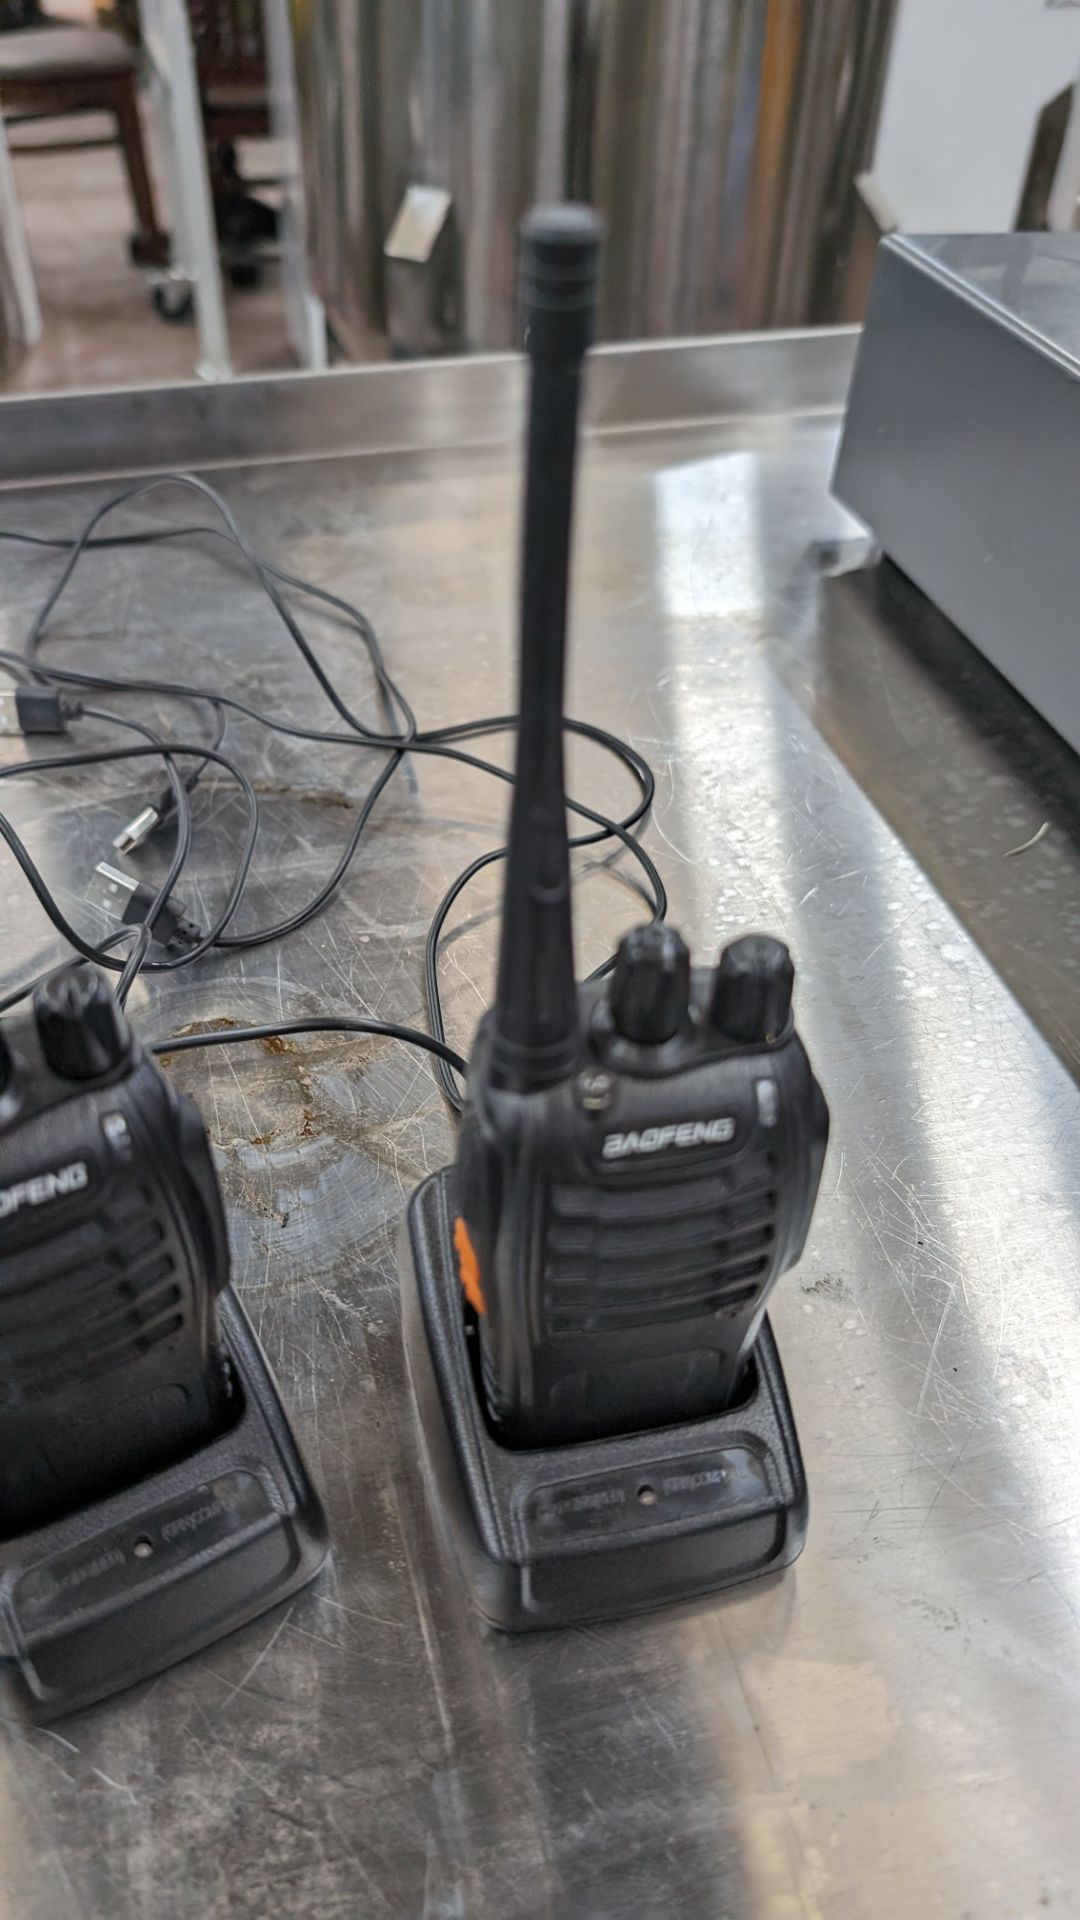 4 off Baofeng walkie-talkies each with their own charging base - Image 7 of 7